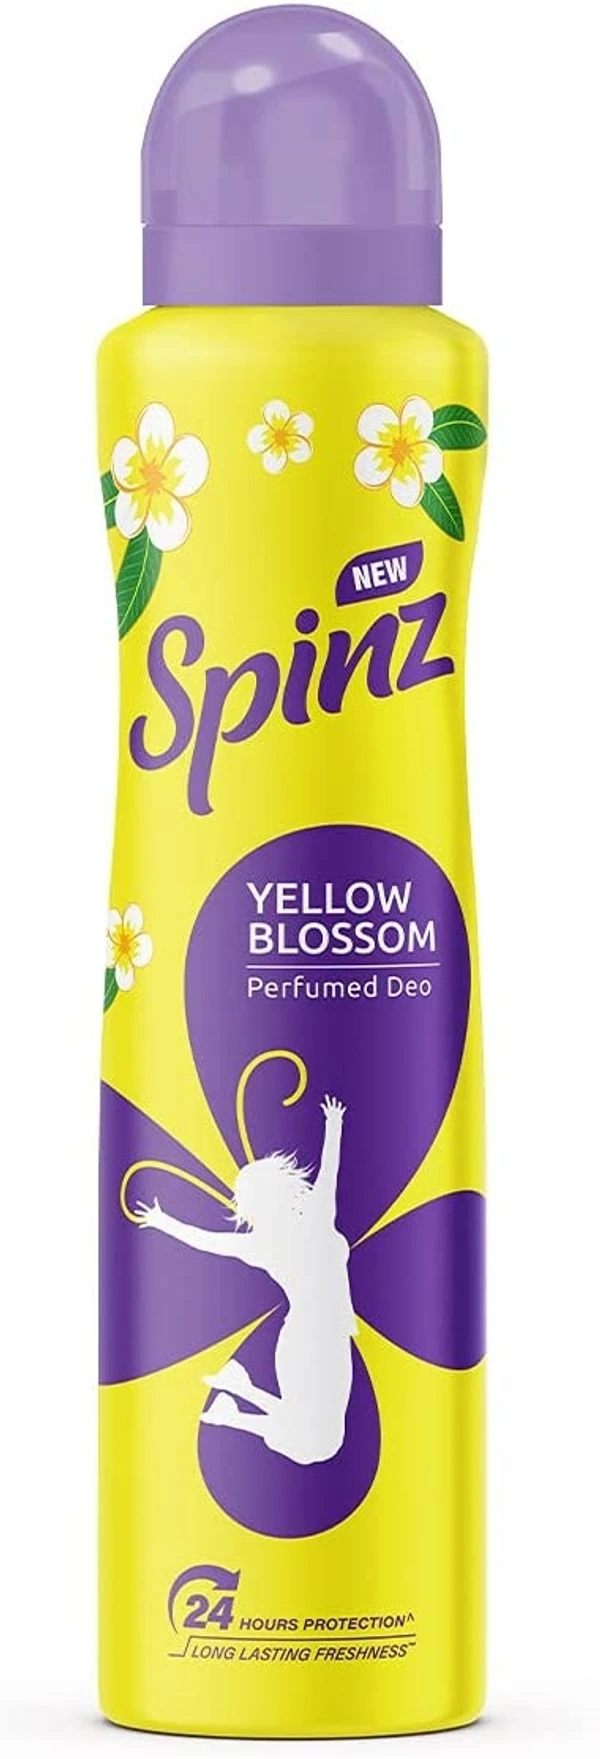 New Spinz Yellow Blossom Perfumed Deo for Women, with Fresh Firangipani Fragrance for Long  Lasting Freshness and 24 Hours Protection, 150ml